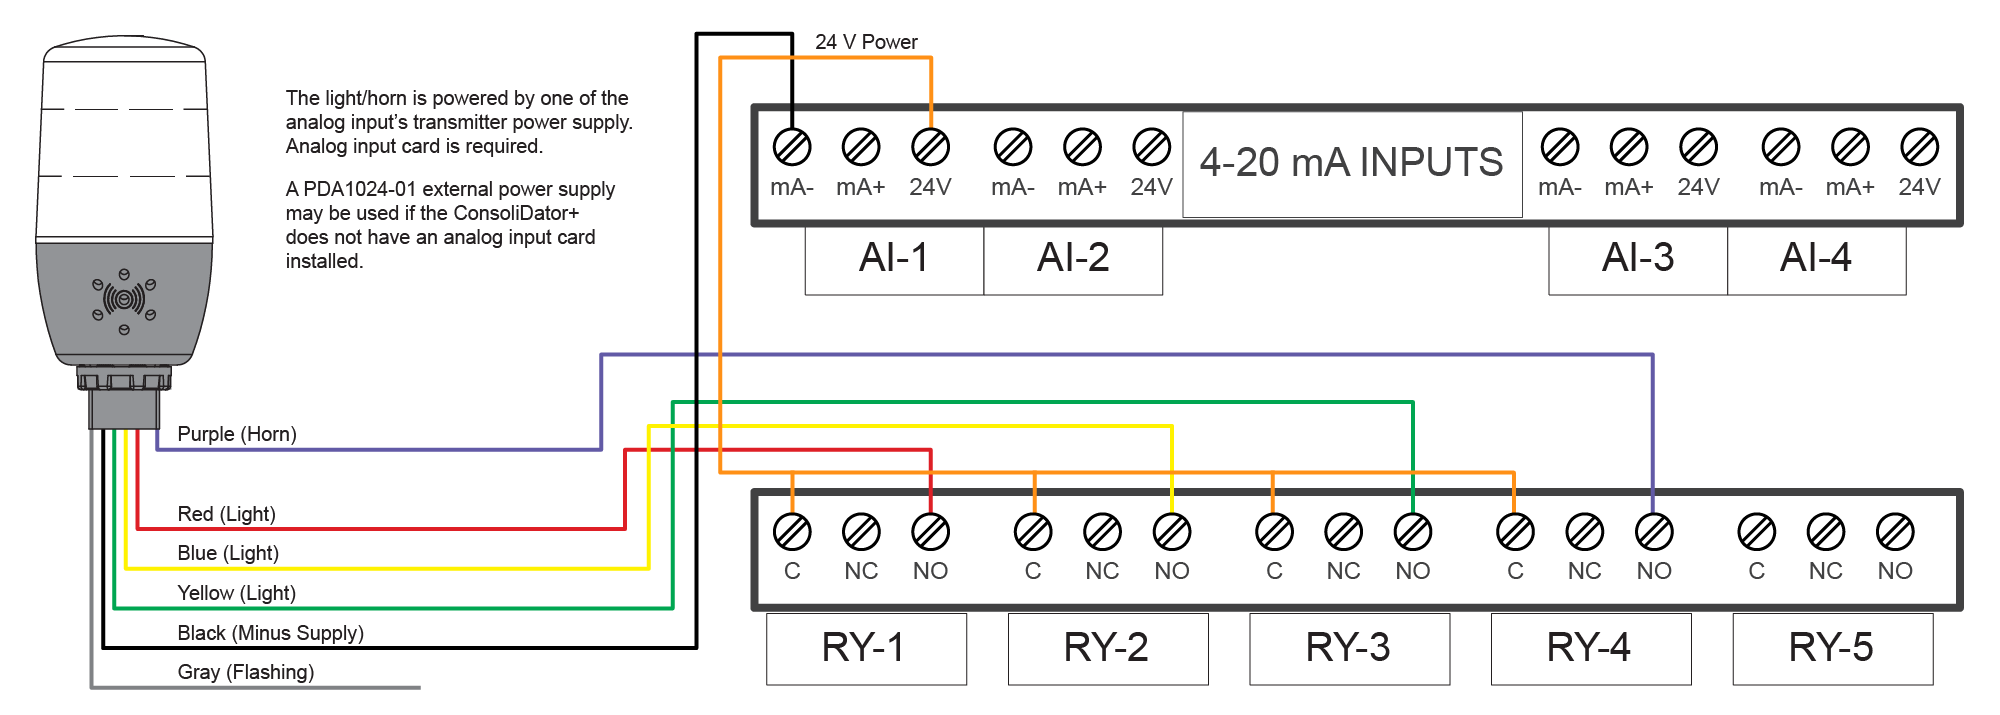 Wiring Connections for MOD-LH3LC-RYG Models Using ConsoliDator+ Controller Internal Power Supply